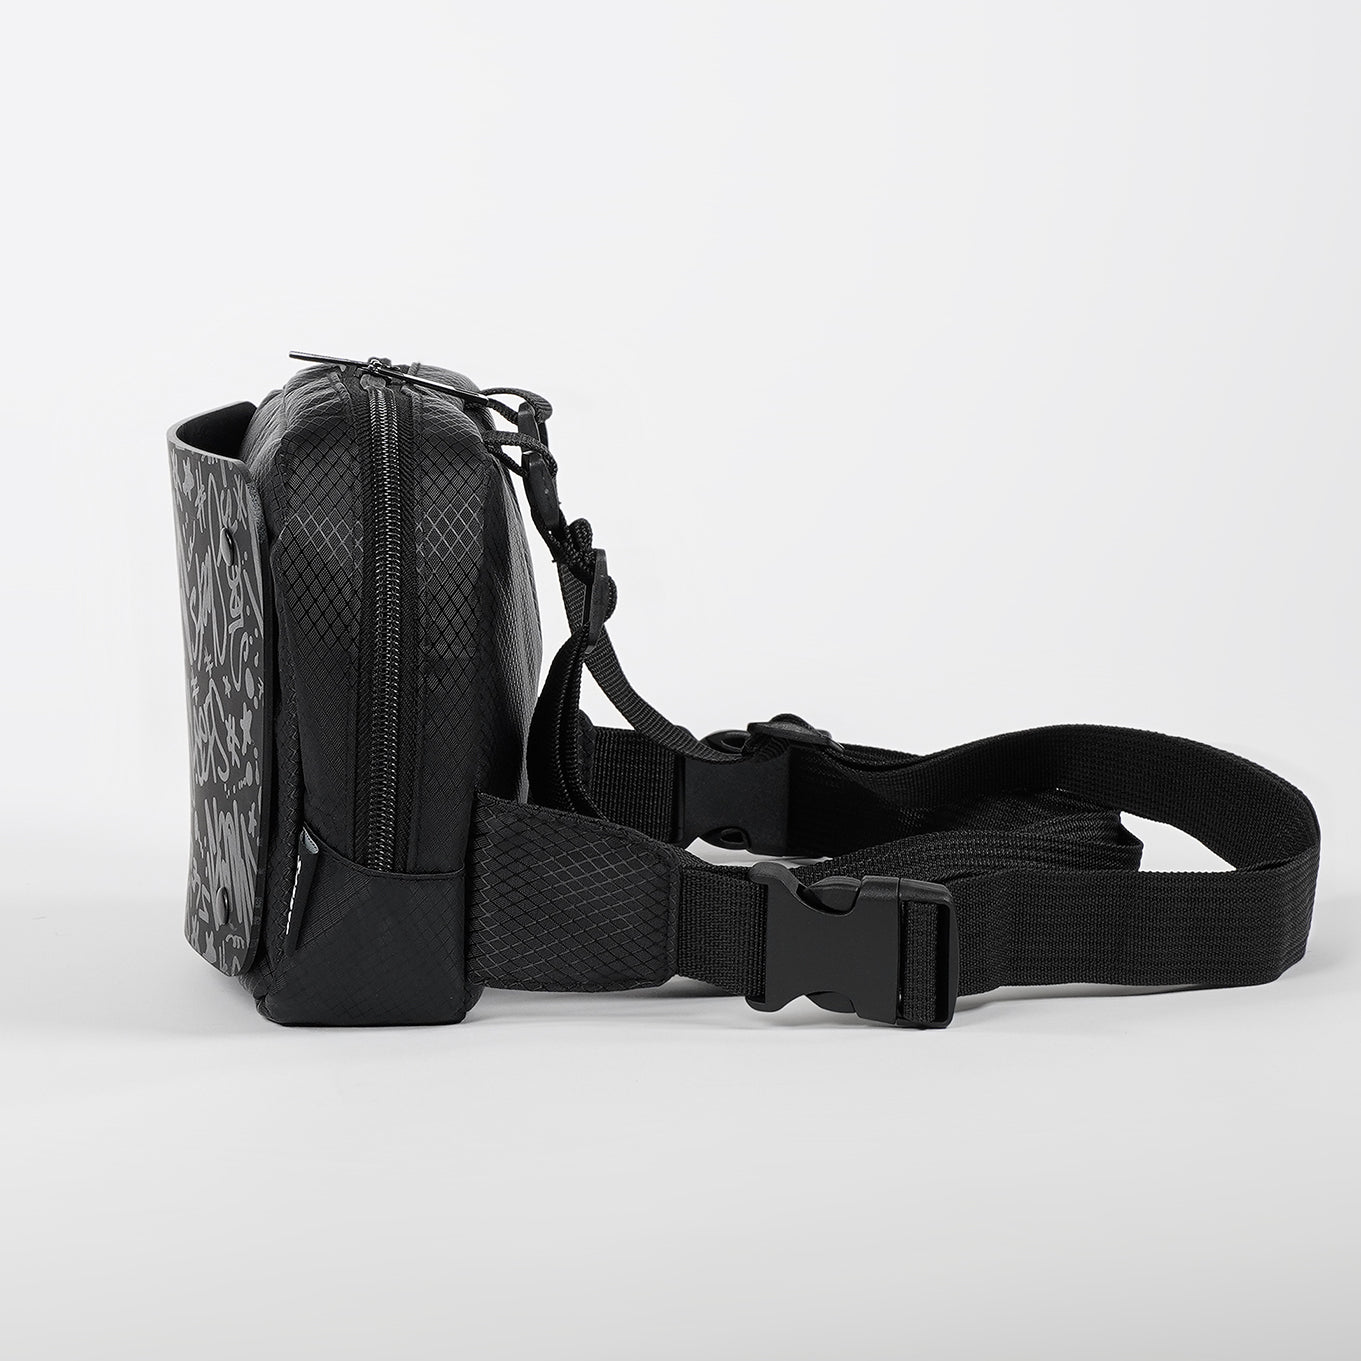 Graffiti Black Chest Pack with hard shell (back plate)